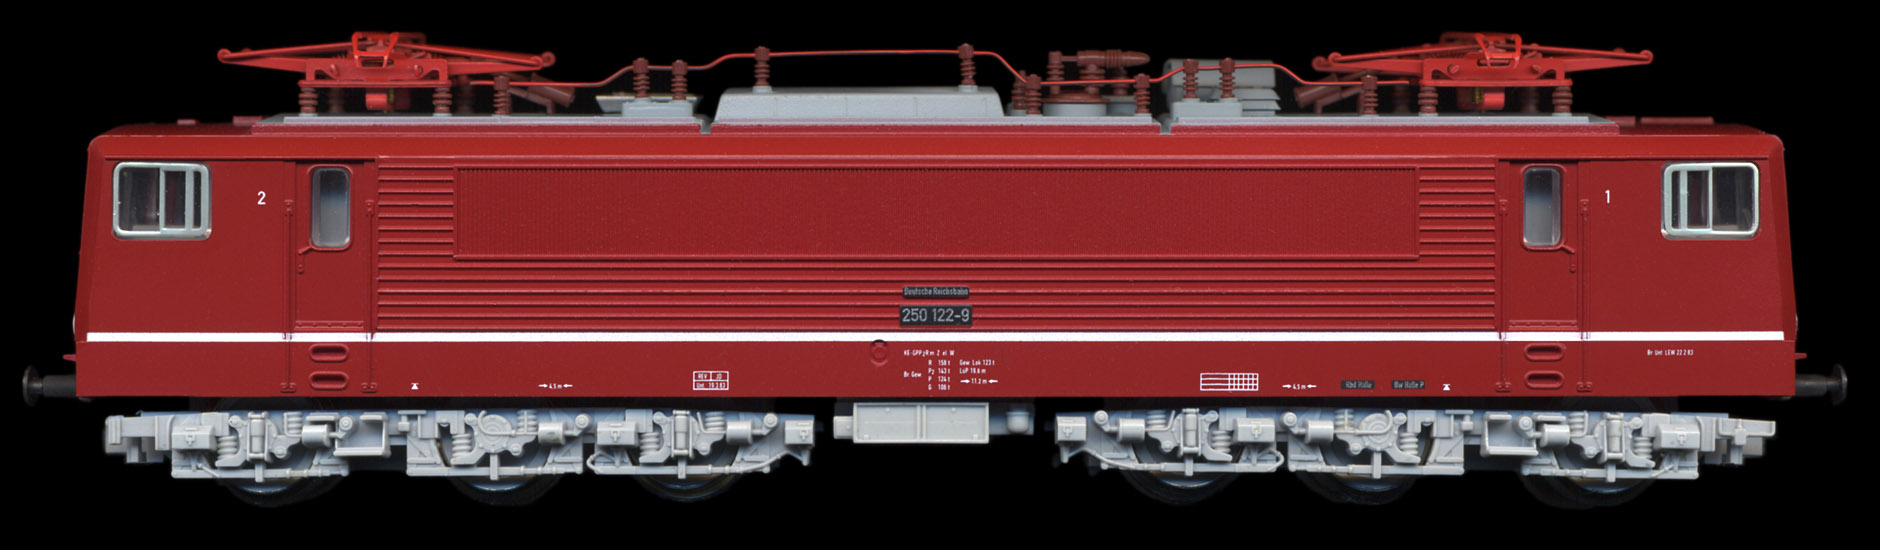 BR 250 122-9